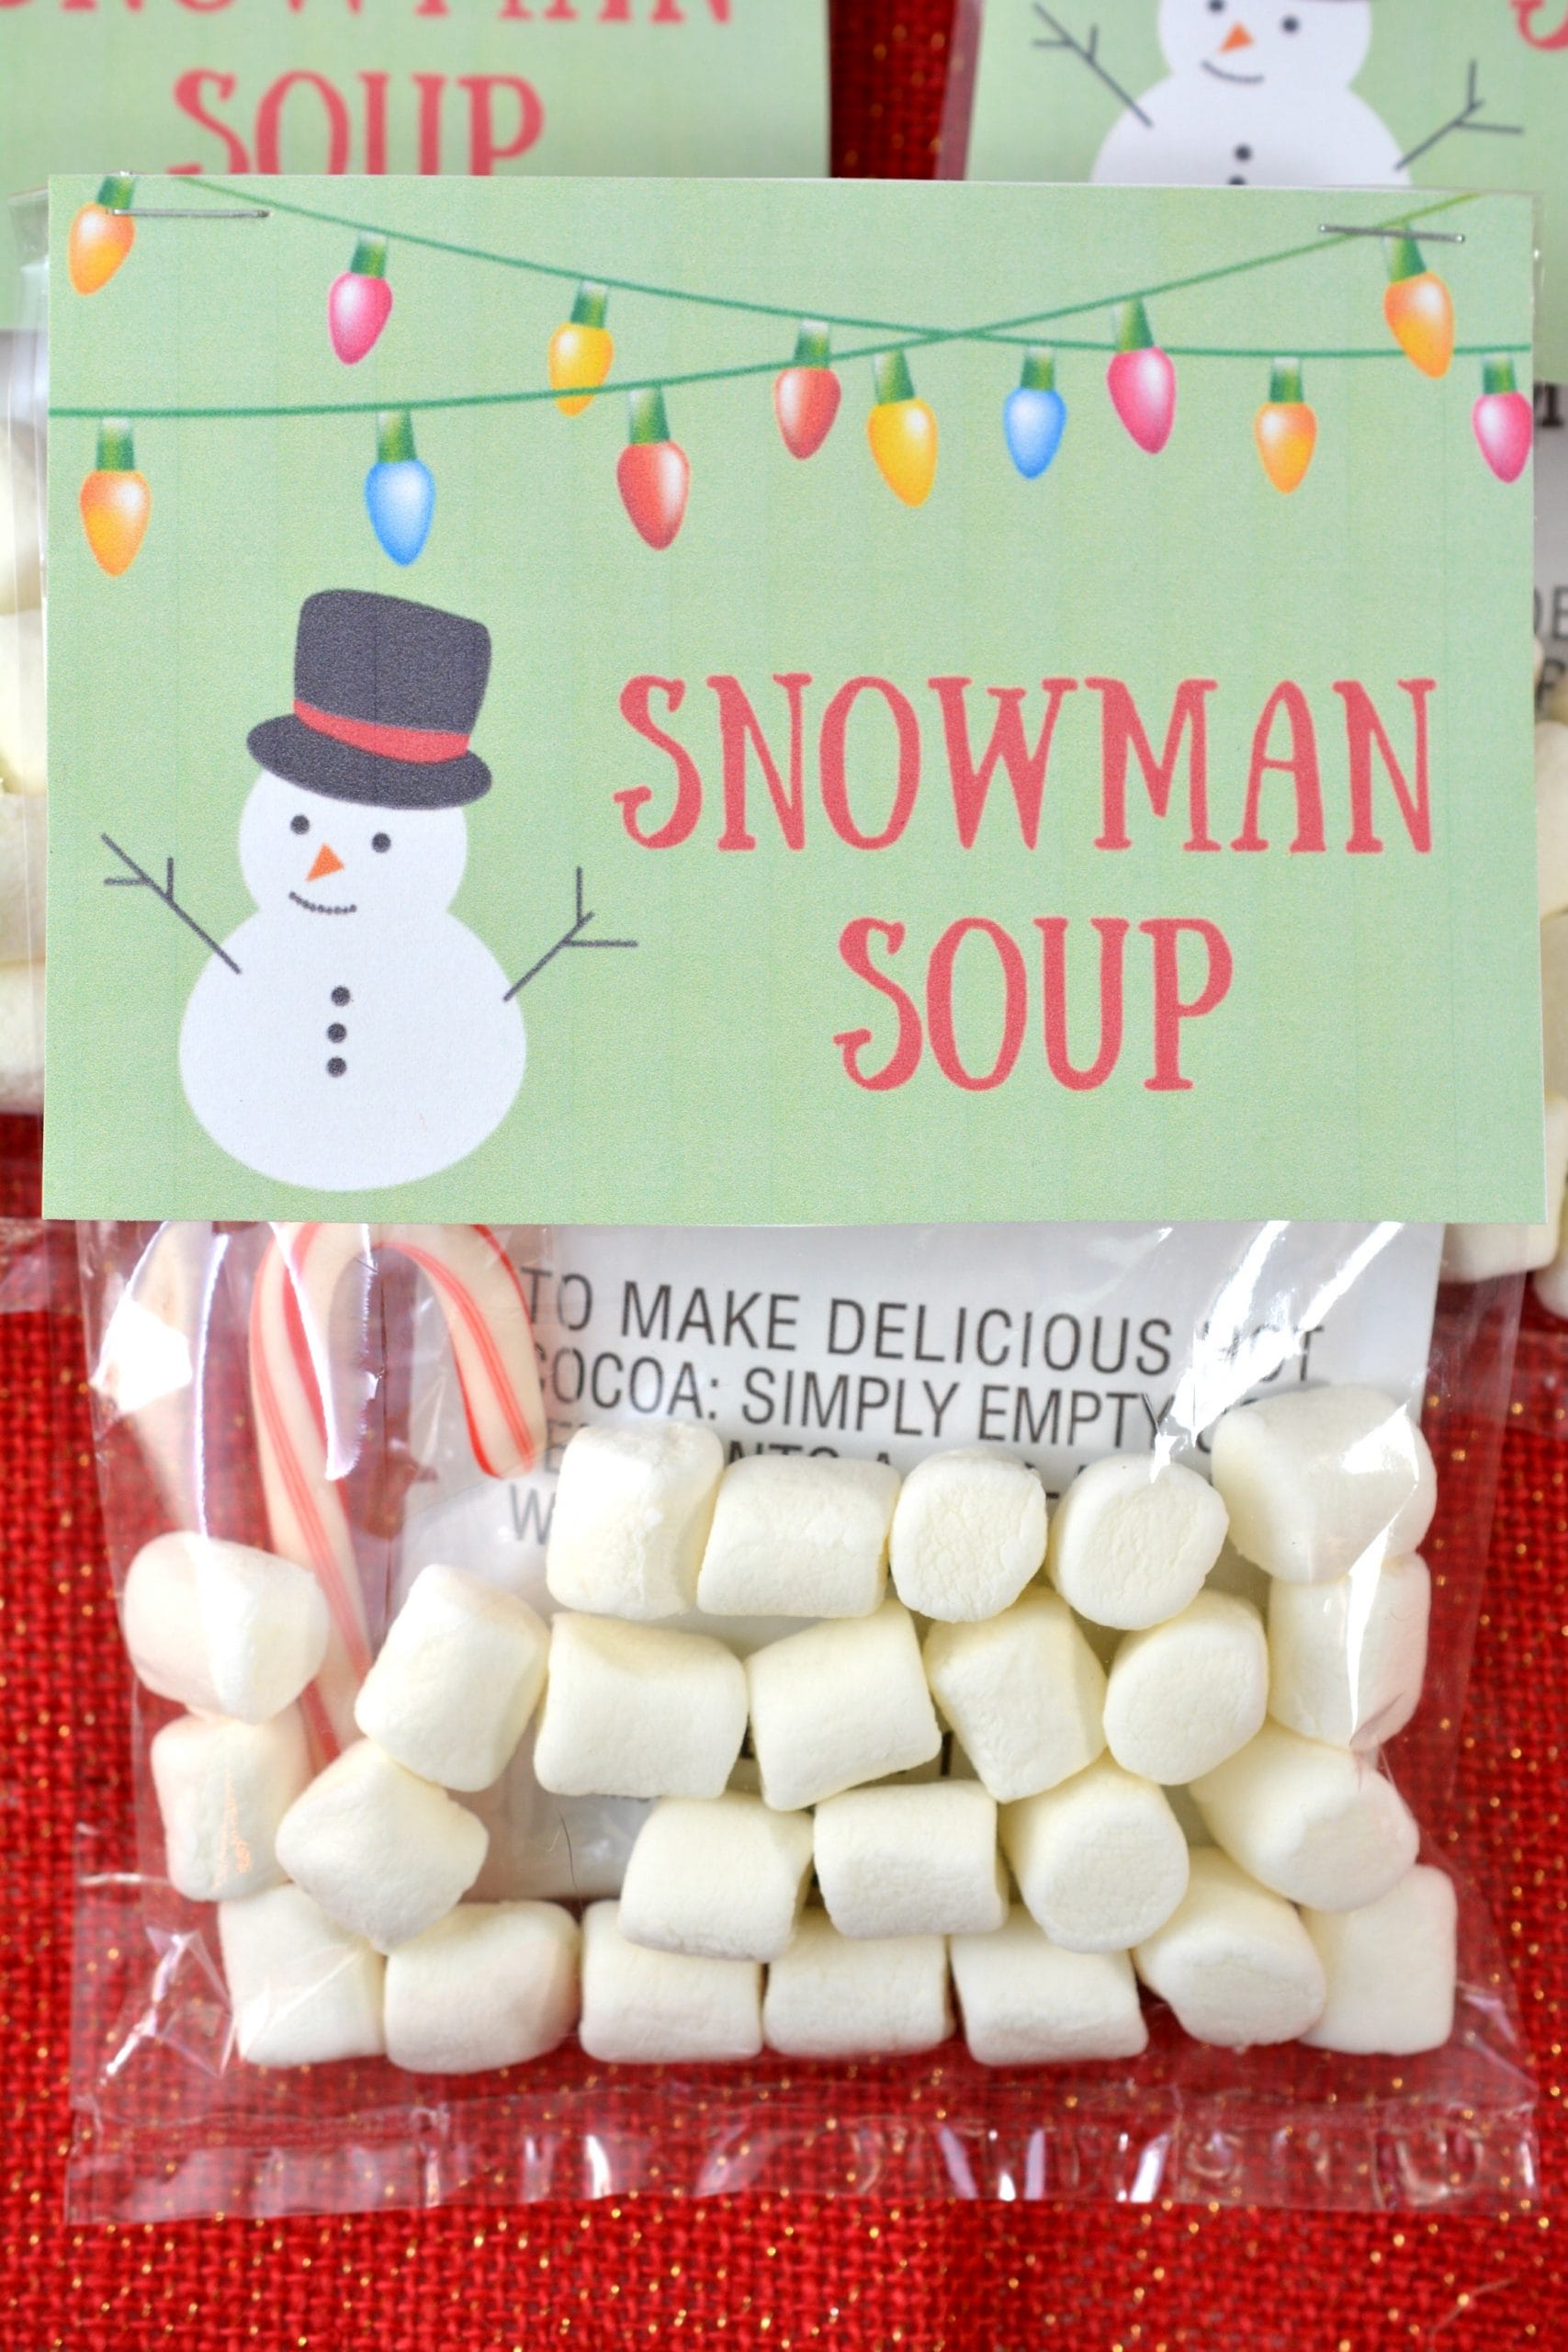 Snowman Soup is a simple homemade Christmas gift idea. With this printable snowman soup tag, you simple place 3 ingredients in the bag and staple the free printable over the bag. Christmas printables like this make holiday gift giving simple and affordable.